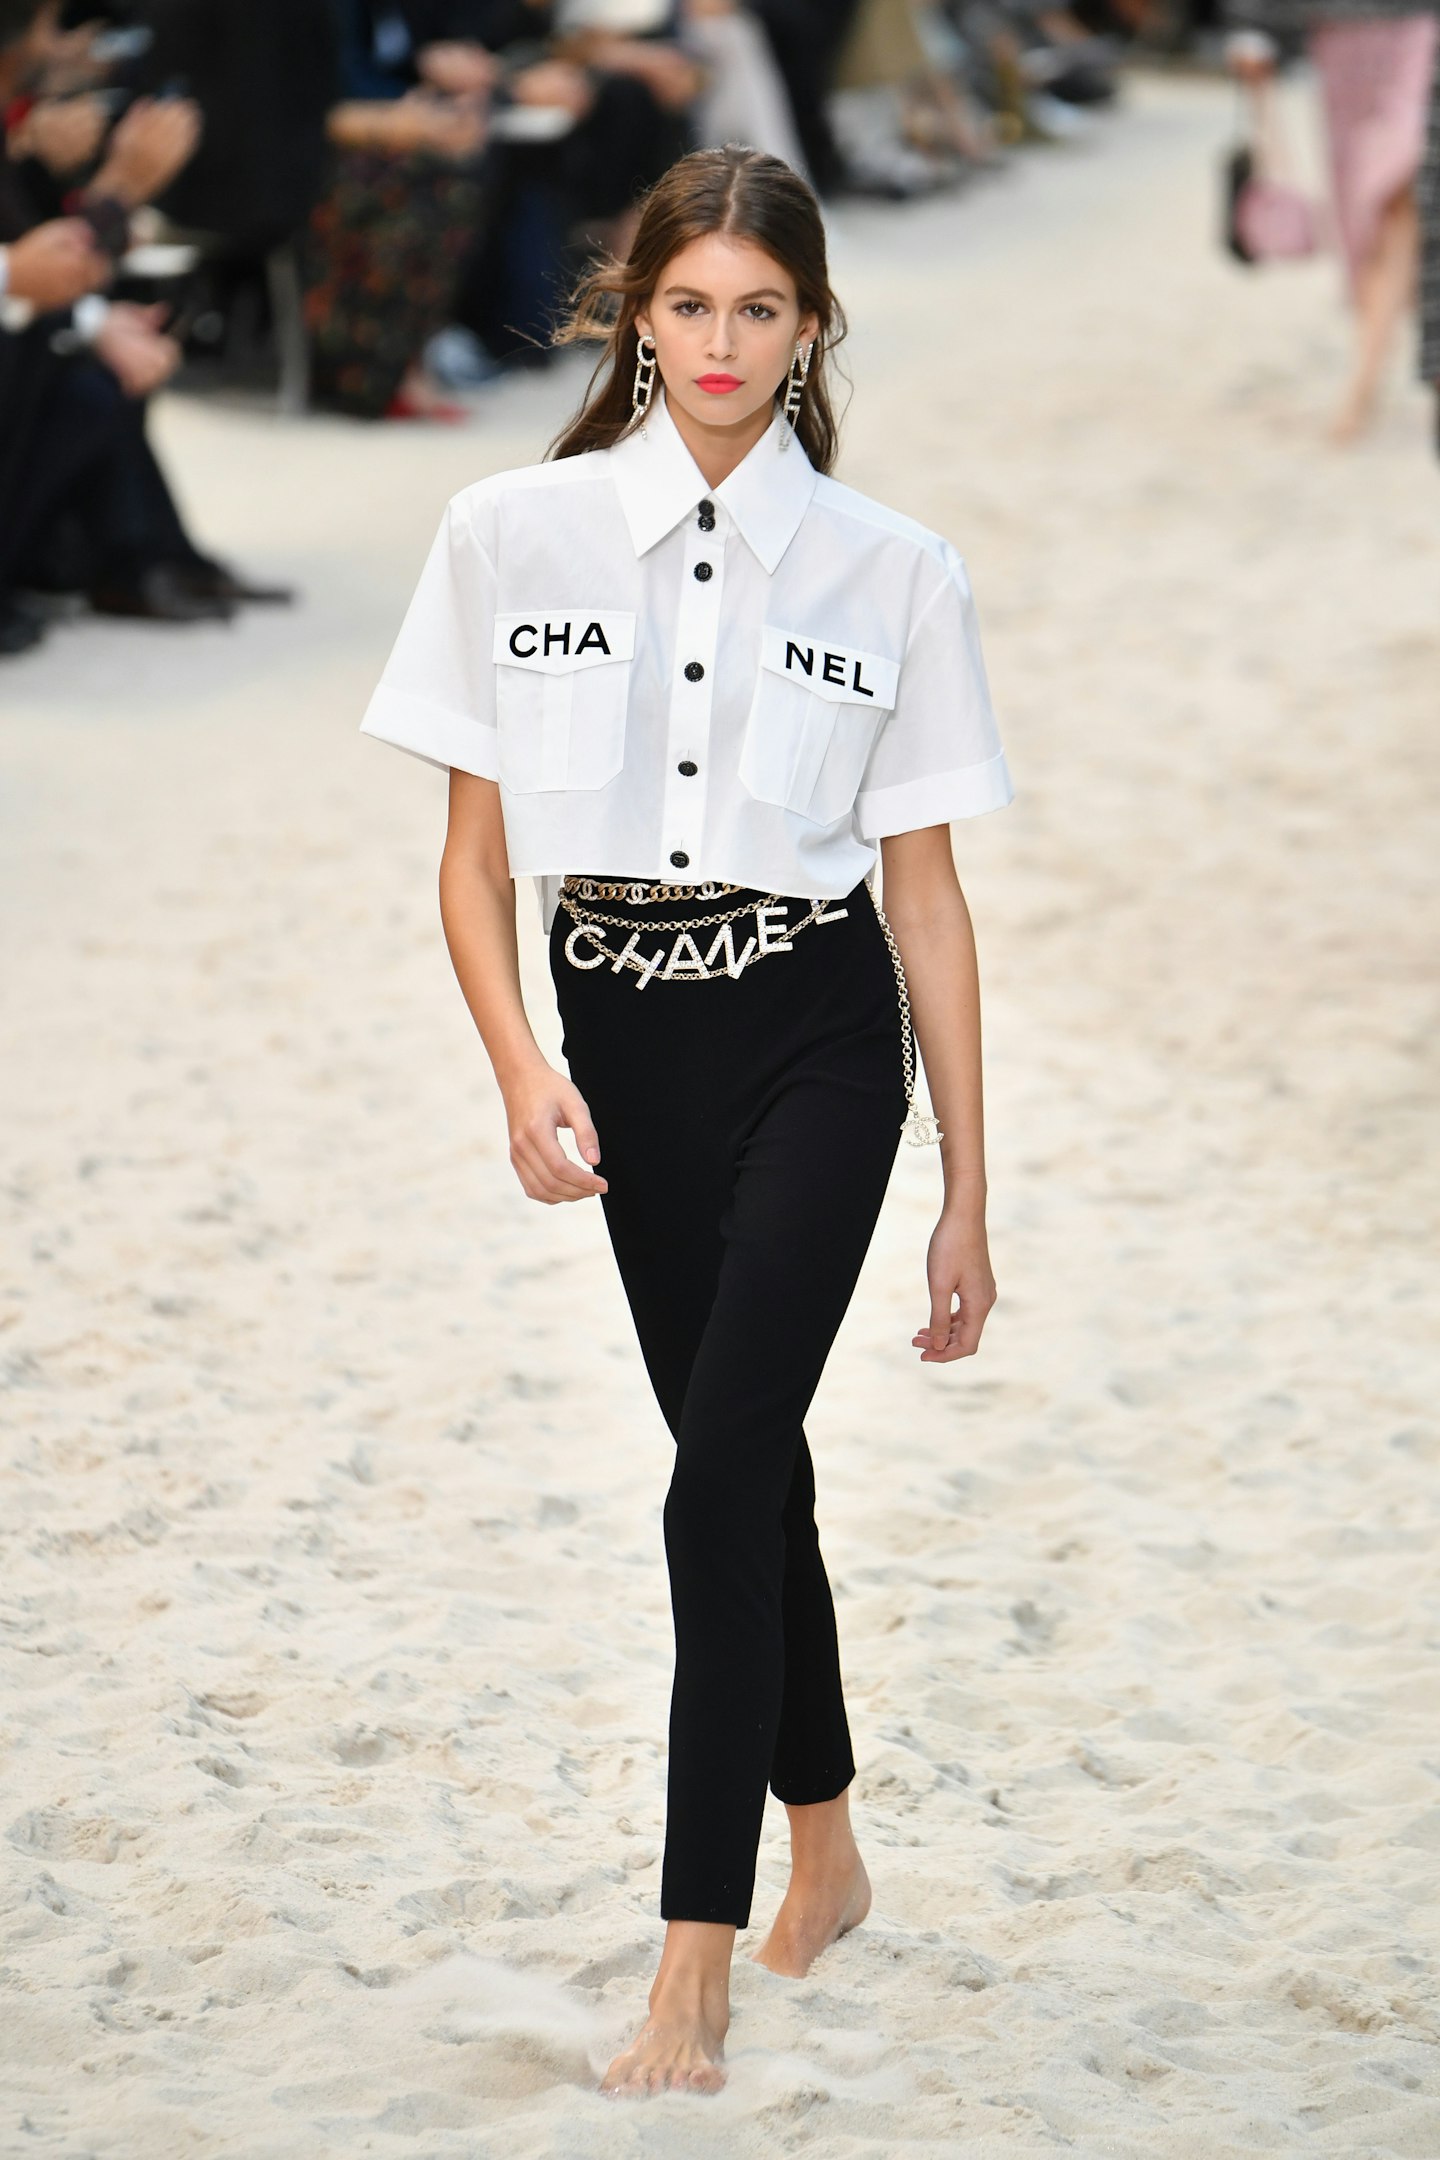 Karl Lagerfeld's Most Iconic Chanel Looks